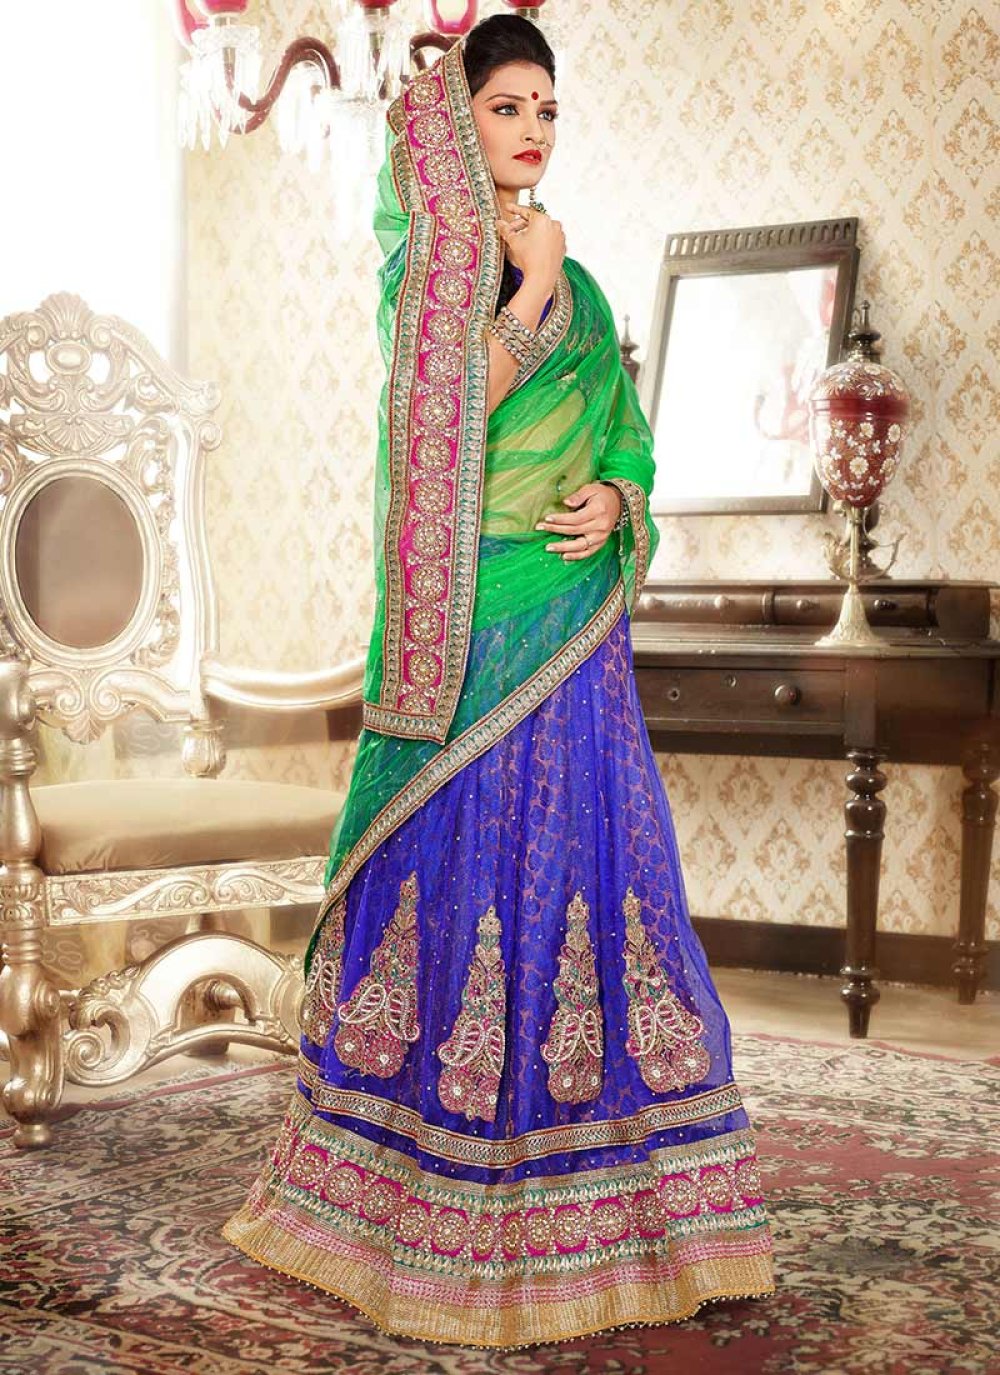 Lehenga Choli- The Royal Outfit Lehenga choli has always been a royal  outfit. Watching any period film like Jodha Akbar, Mughal-E-Azam, Padmavat,  and many more, you must have realized the intensive use